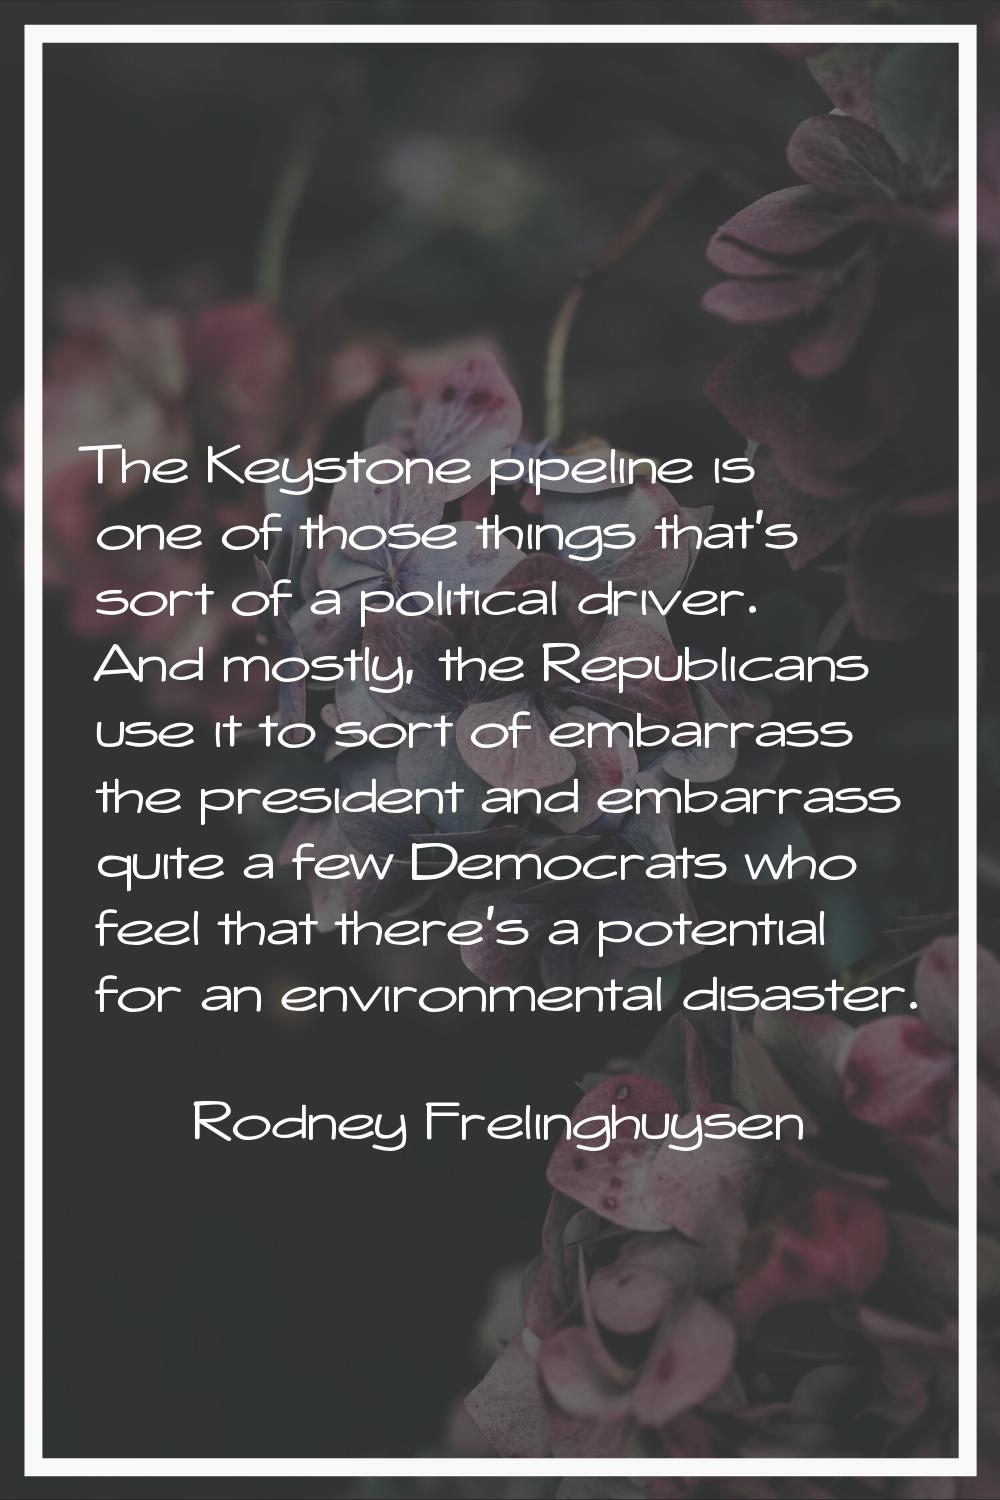 The Keystone pipeline is one of those things that's sort of a political driver. And mostly, the Rep